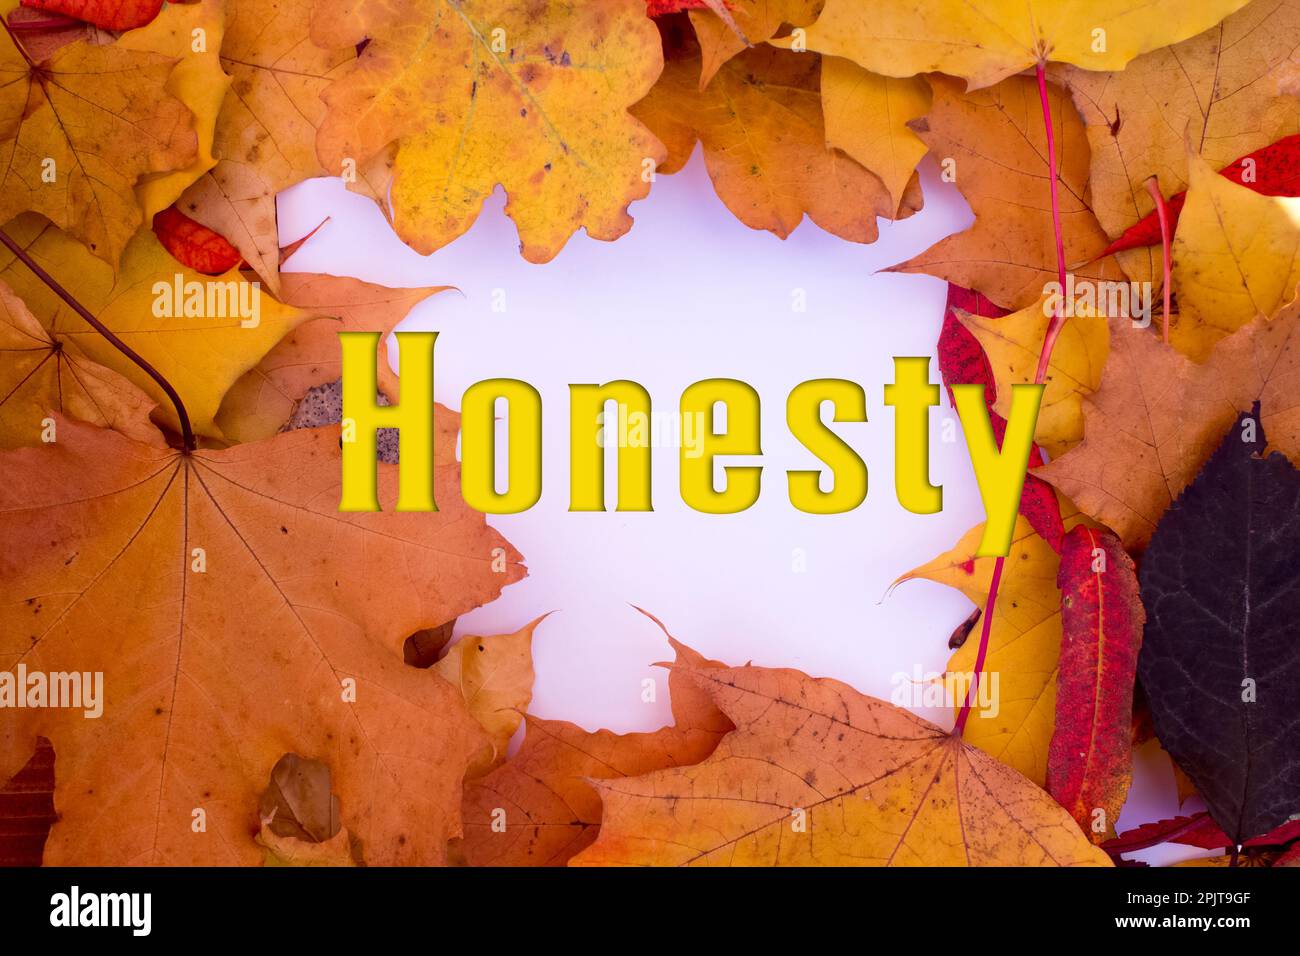 Autumn leaves, objects with Honesty text. Natural patterns, color design. Stock Photo